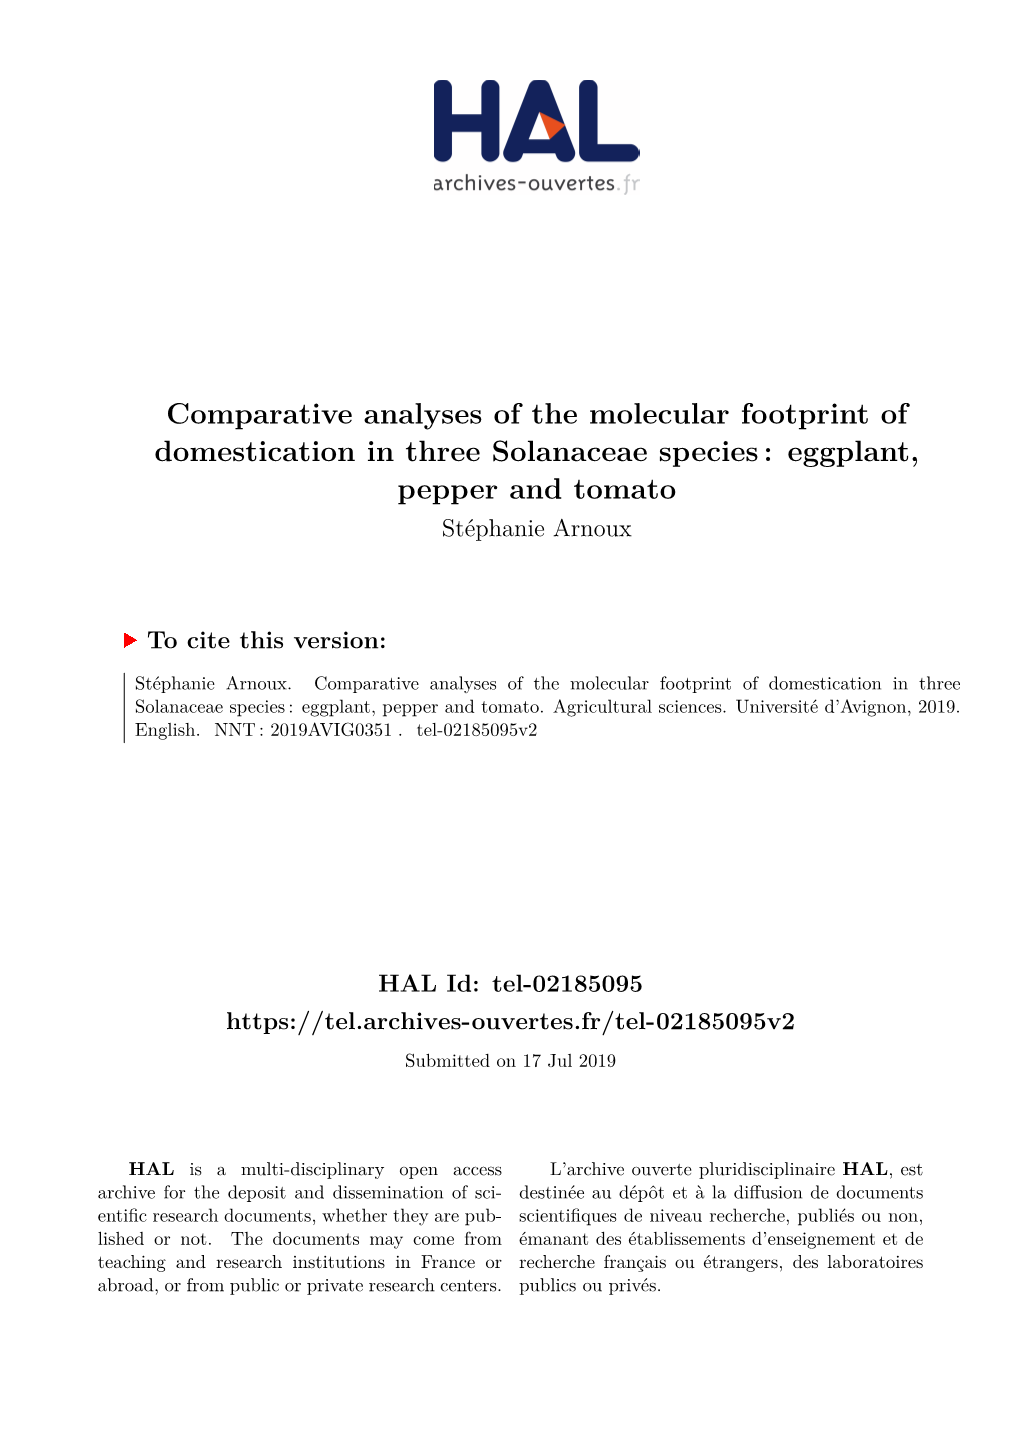 Comparative Analyses of the Molecular Footprint of Domestication in Three Solanaceae Species : Eggplant, Pepper and Tomato Stéphanie Arnoux